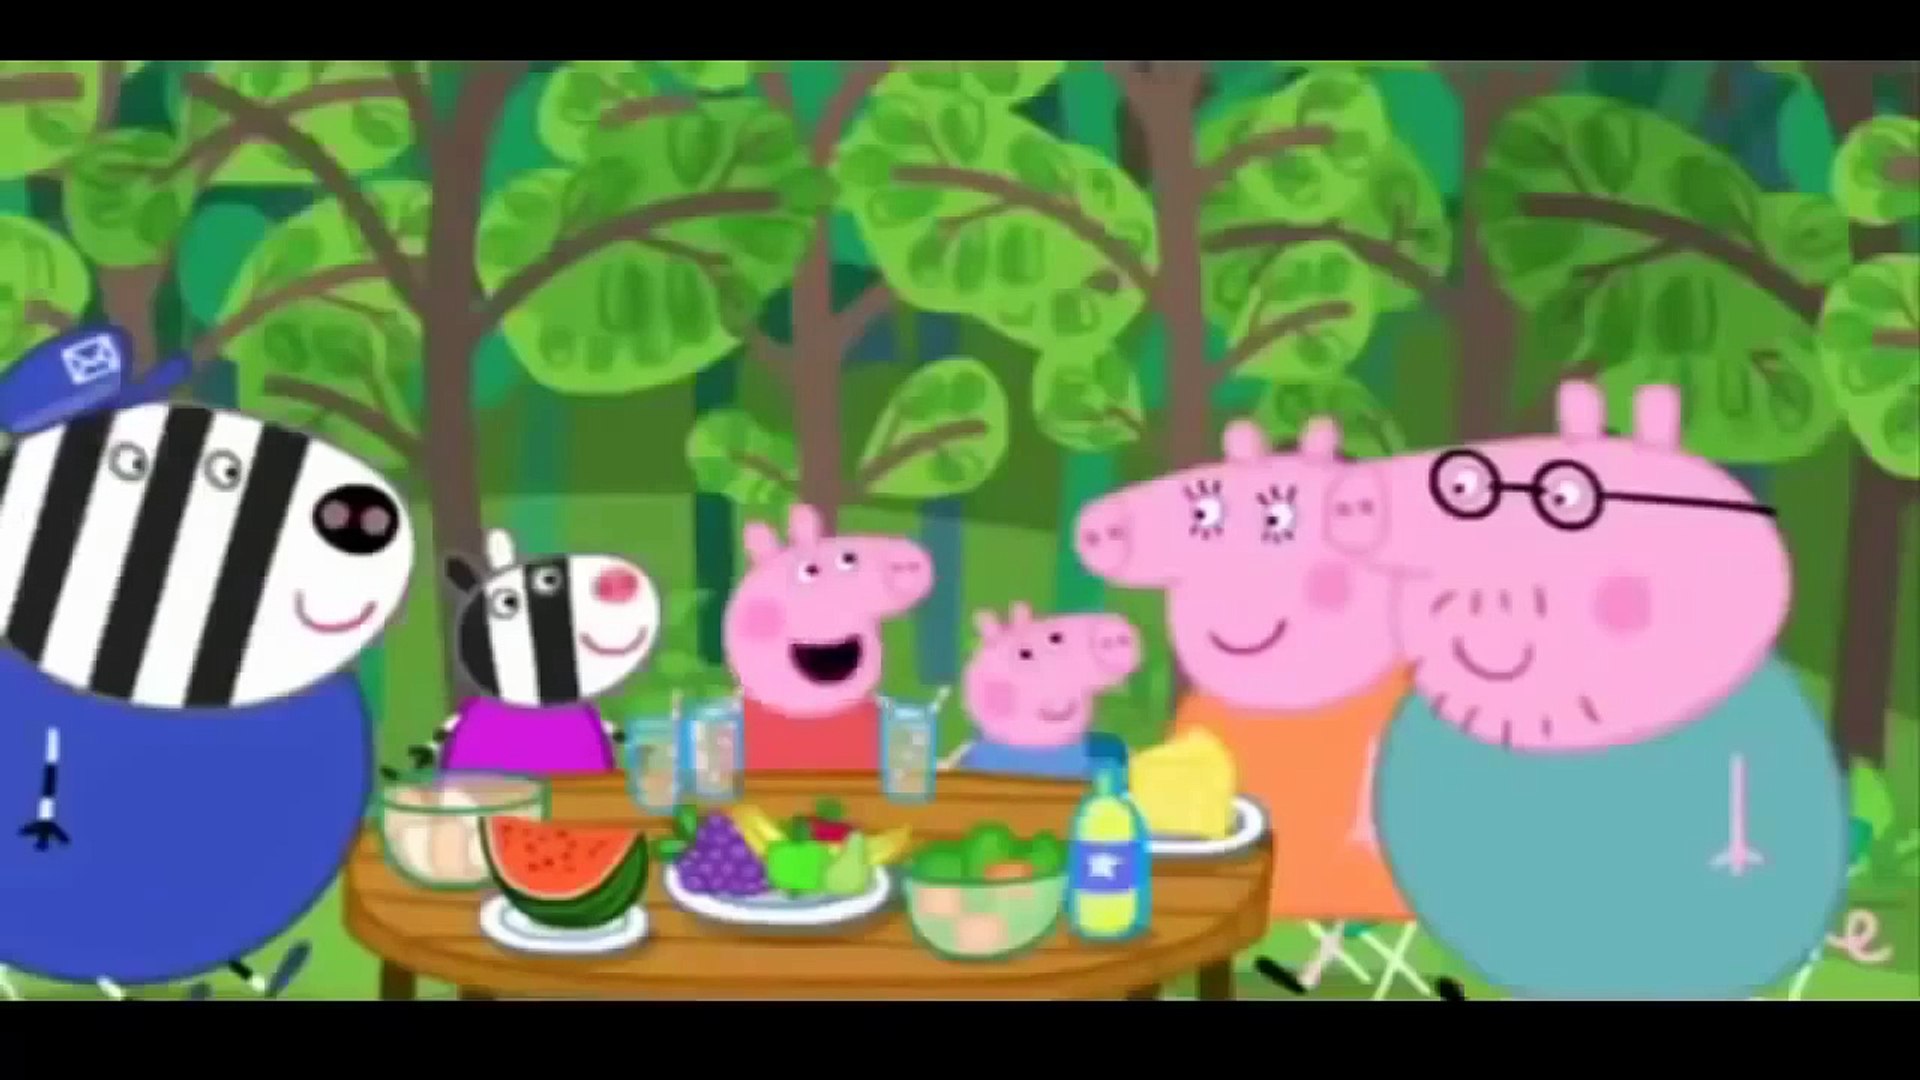 Peppa Pig 2015 New Toys English Episodes Peppa Camping In Camper Van ft.  Bing Bong Song HD Video